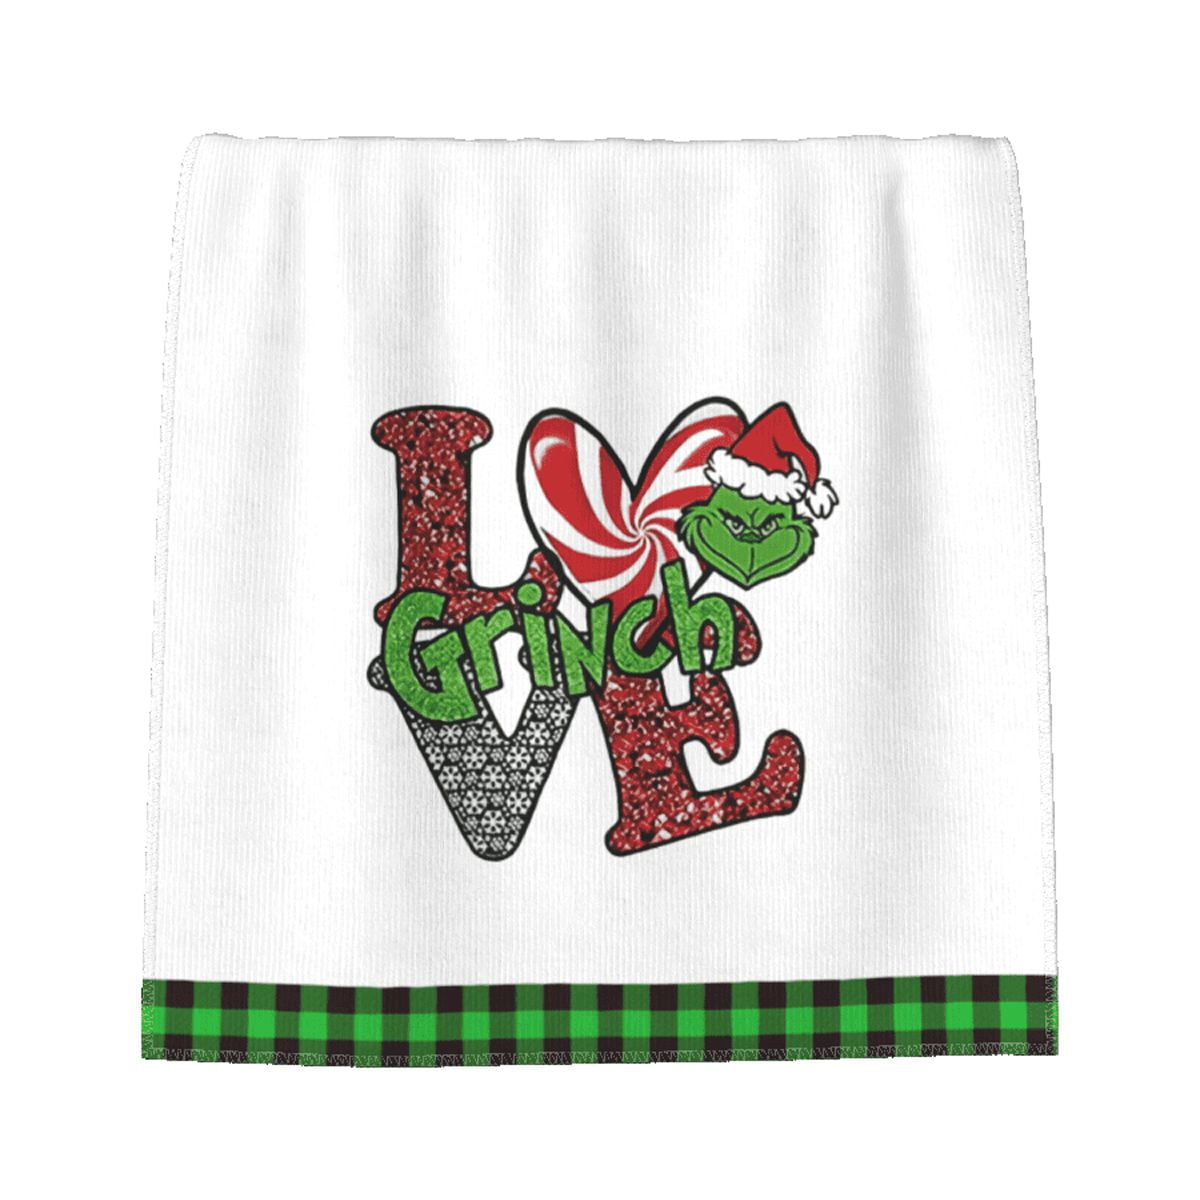 6 Decorative Buffalo Check Plaid Hand Towels 15.8 x 23.6 Inch Absorbent Red  Black Dish Towels Christmas Kitchen Towels Gnome Truck Christmas Tea Towels  for Winter Kitchen Housewarming Gifts